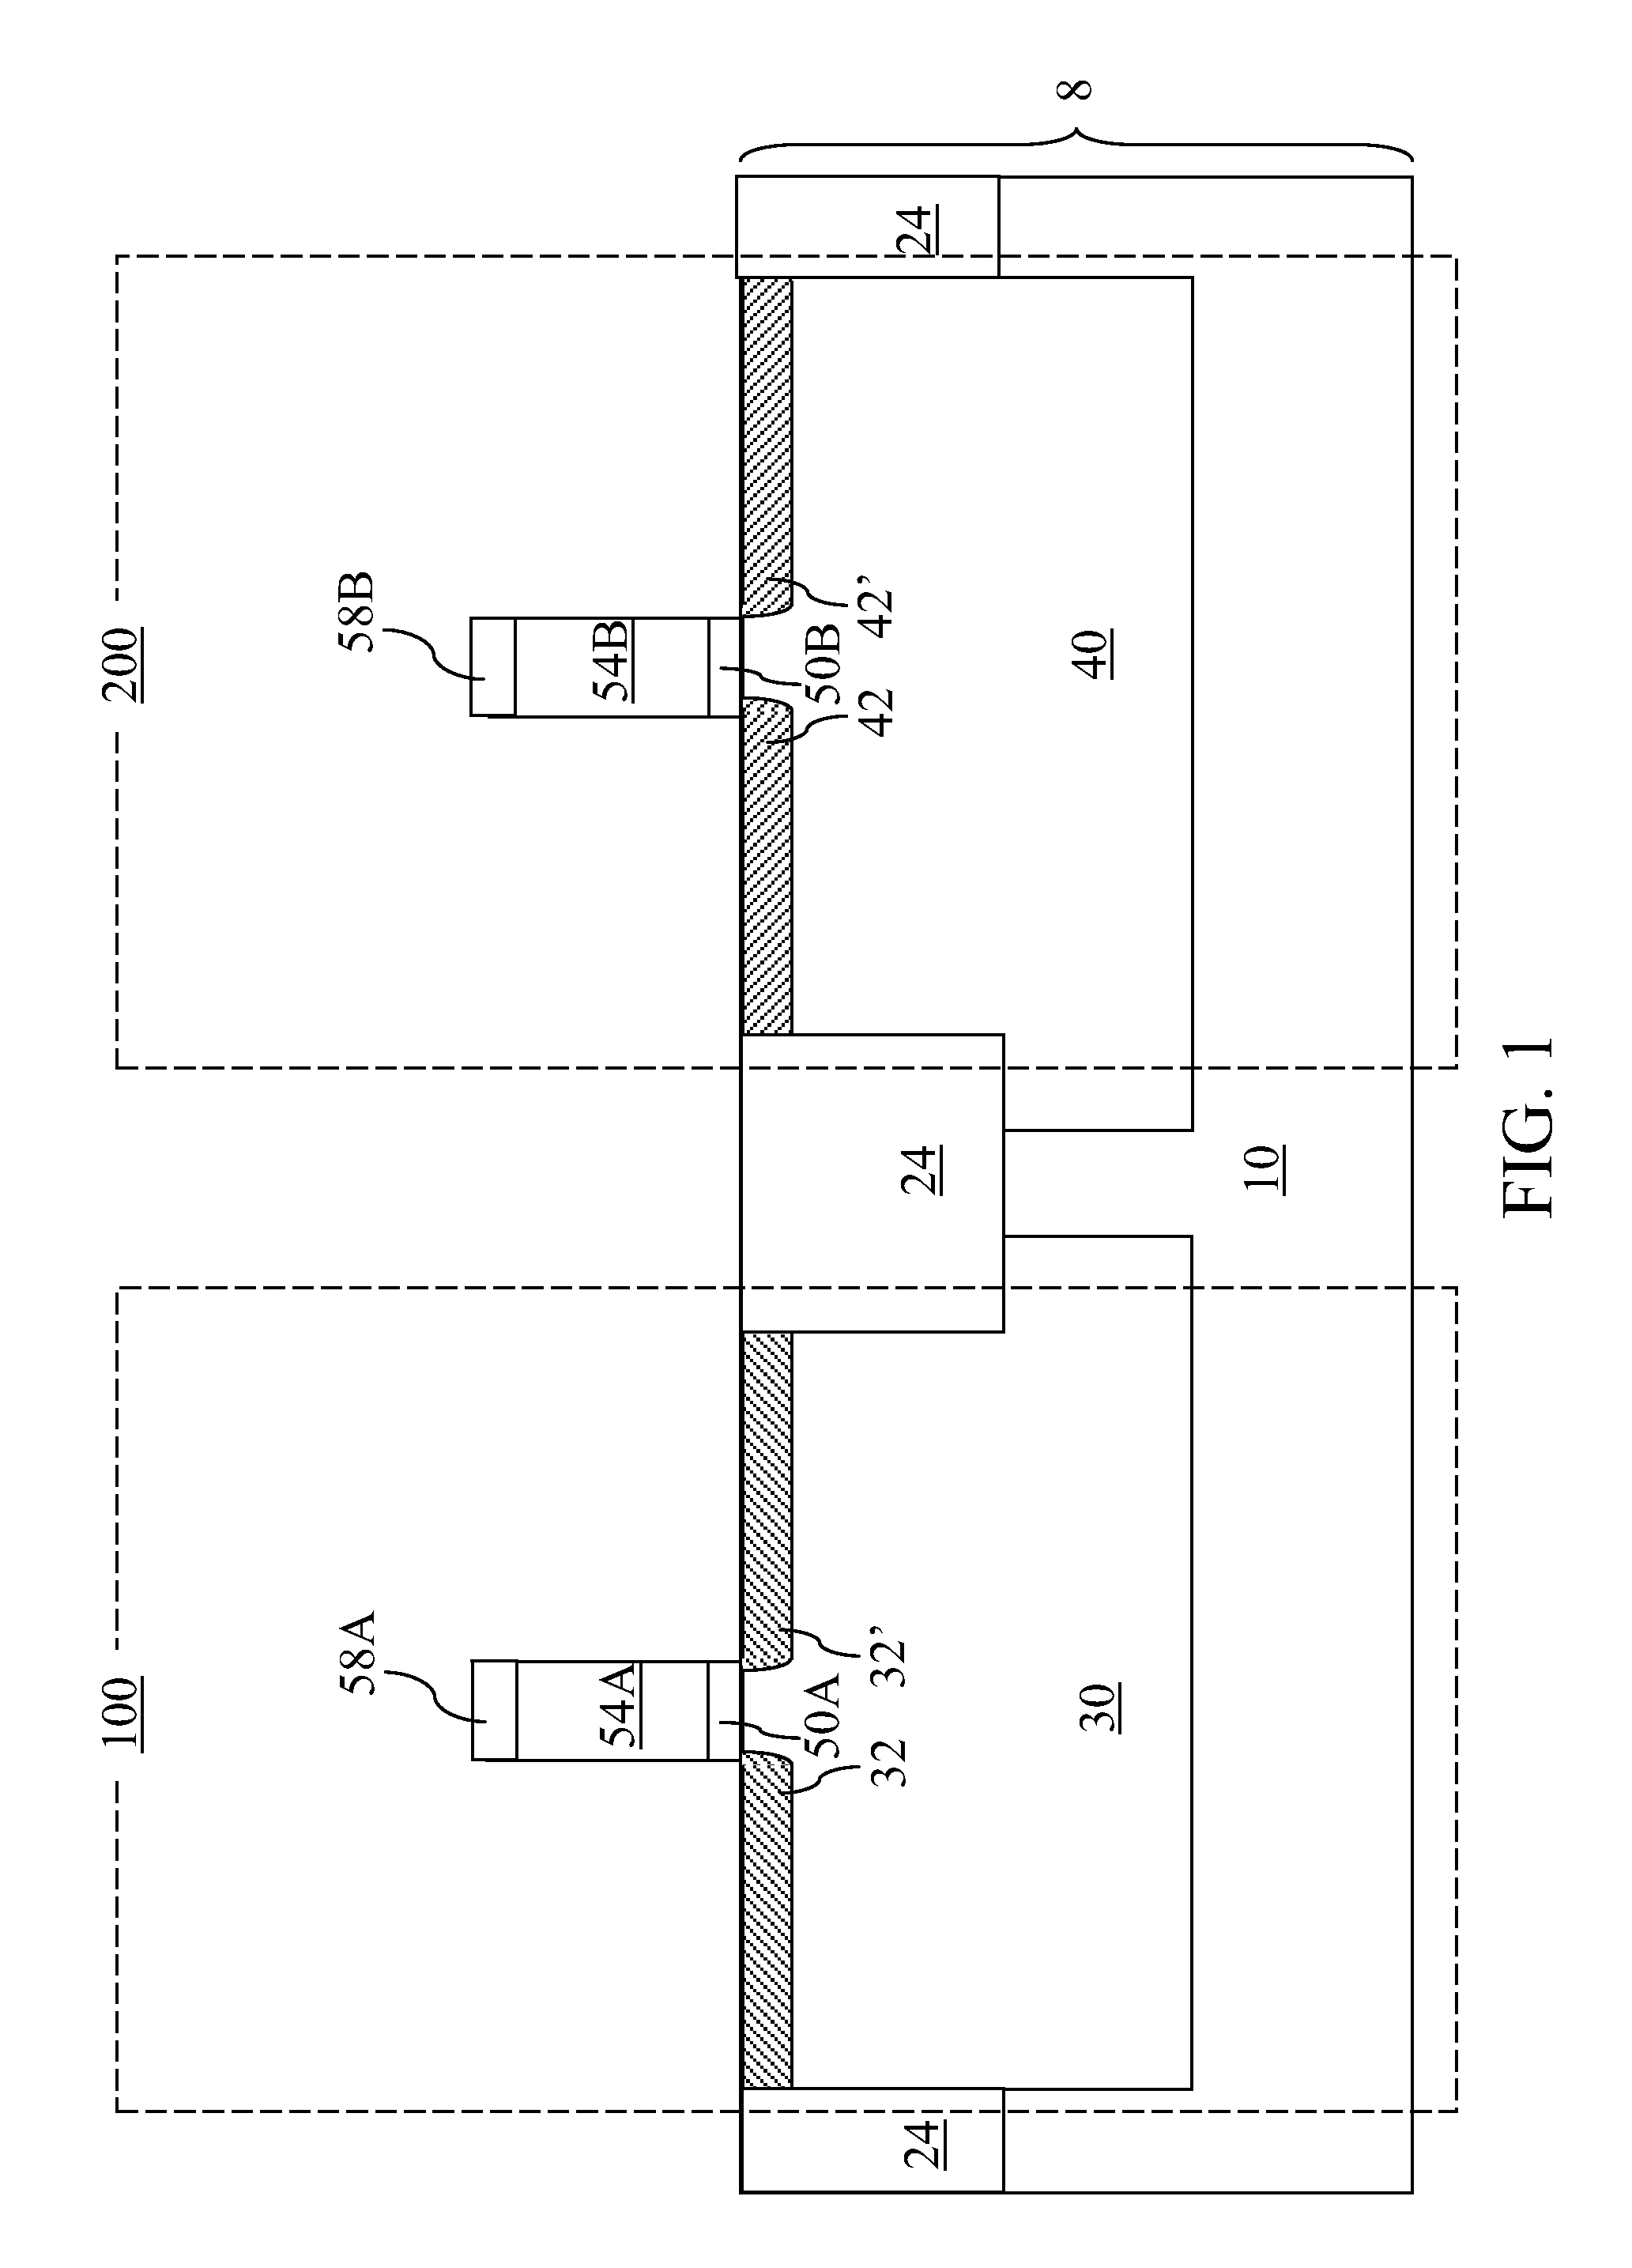 CMOS transistors with stressed high mobility channels